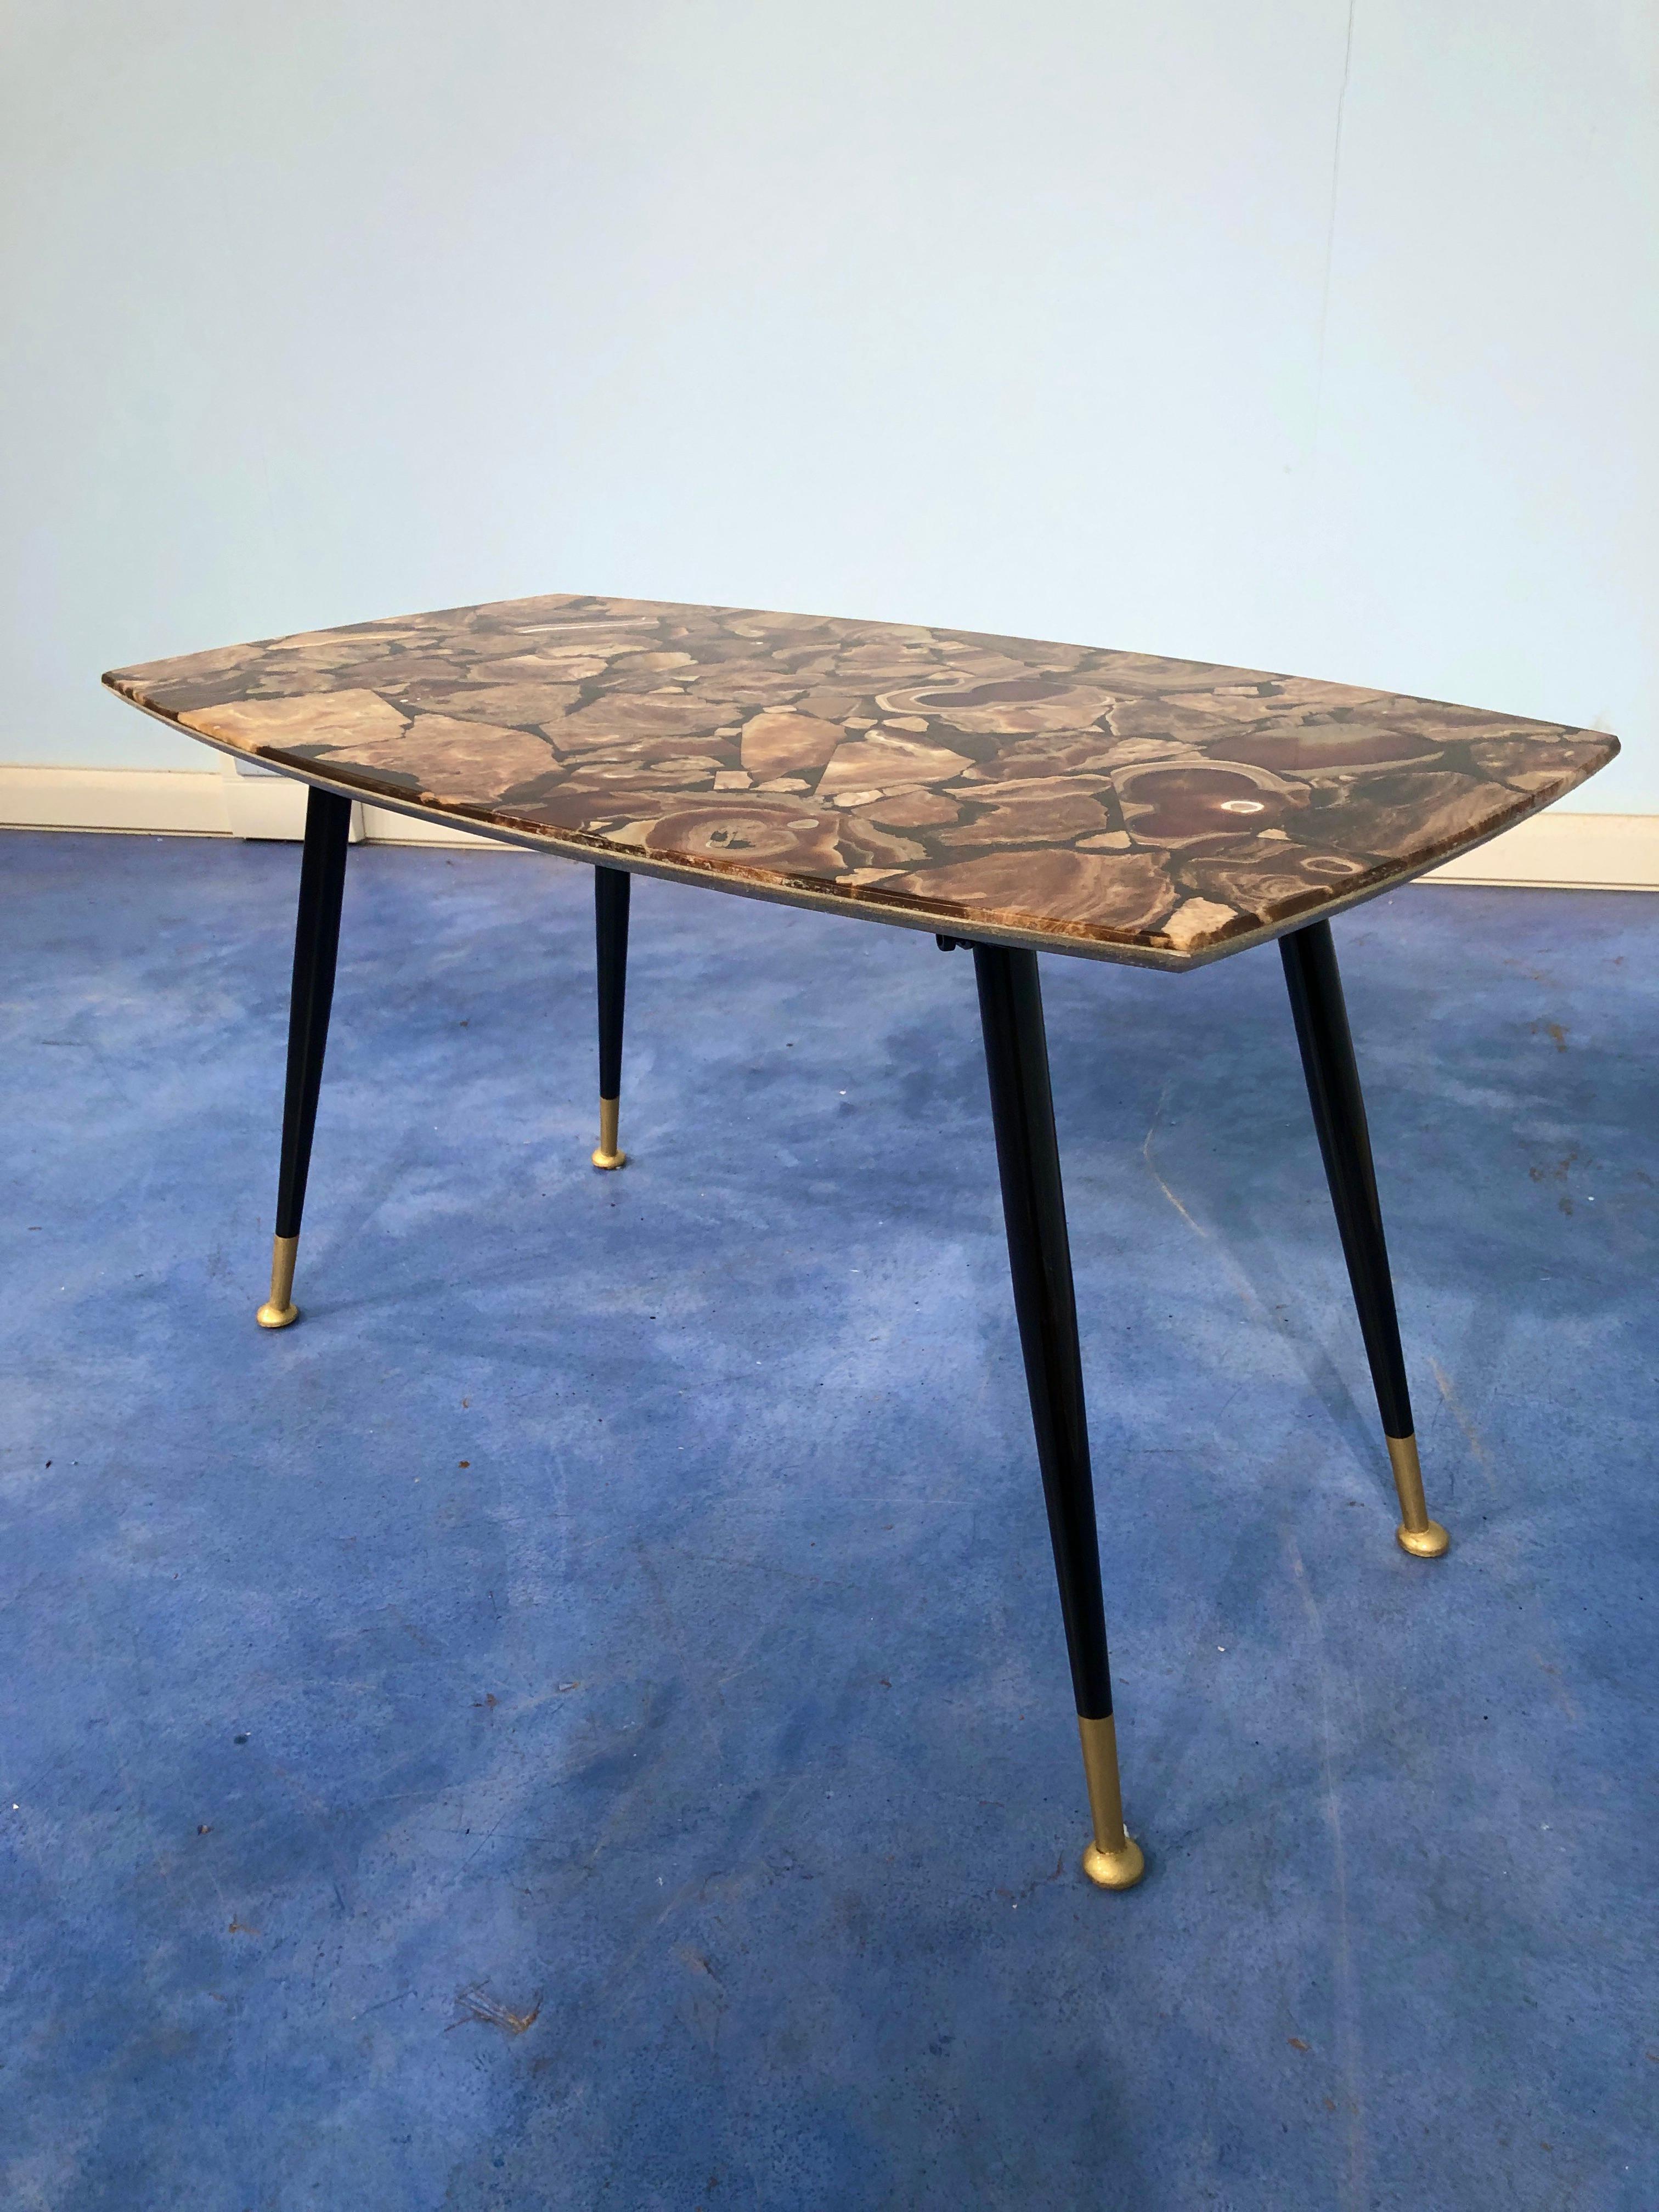 Italian Midcentury Mosaic Marble Coffee Table, 1950 In Good Condition For Sale In Traversetolo, IT